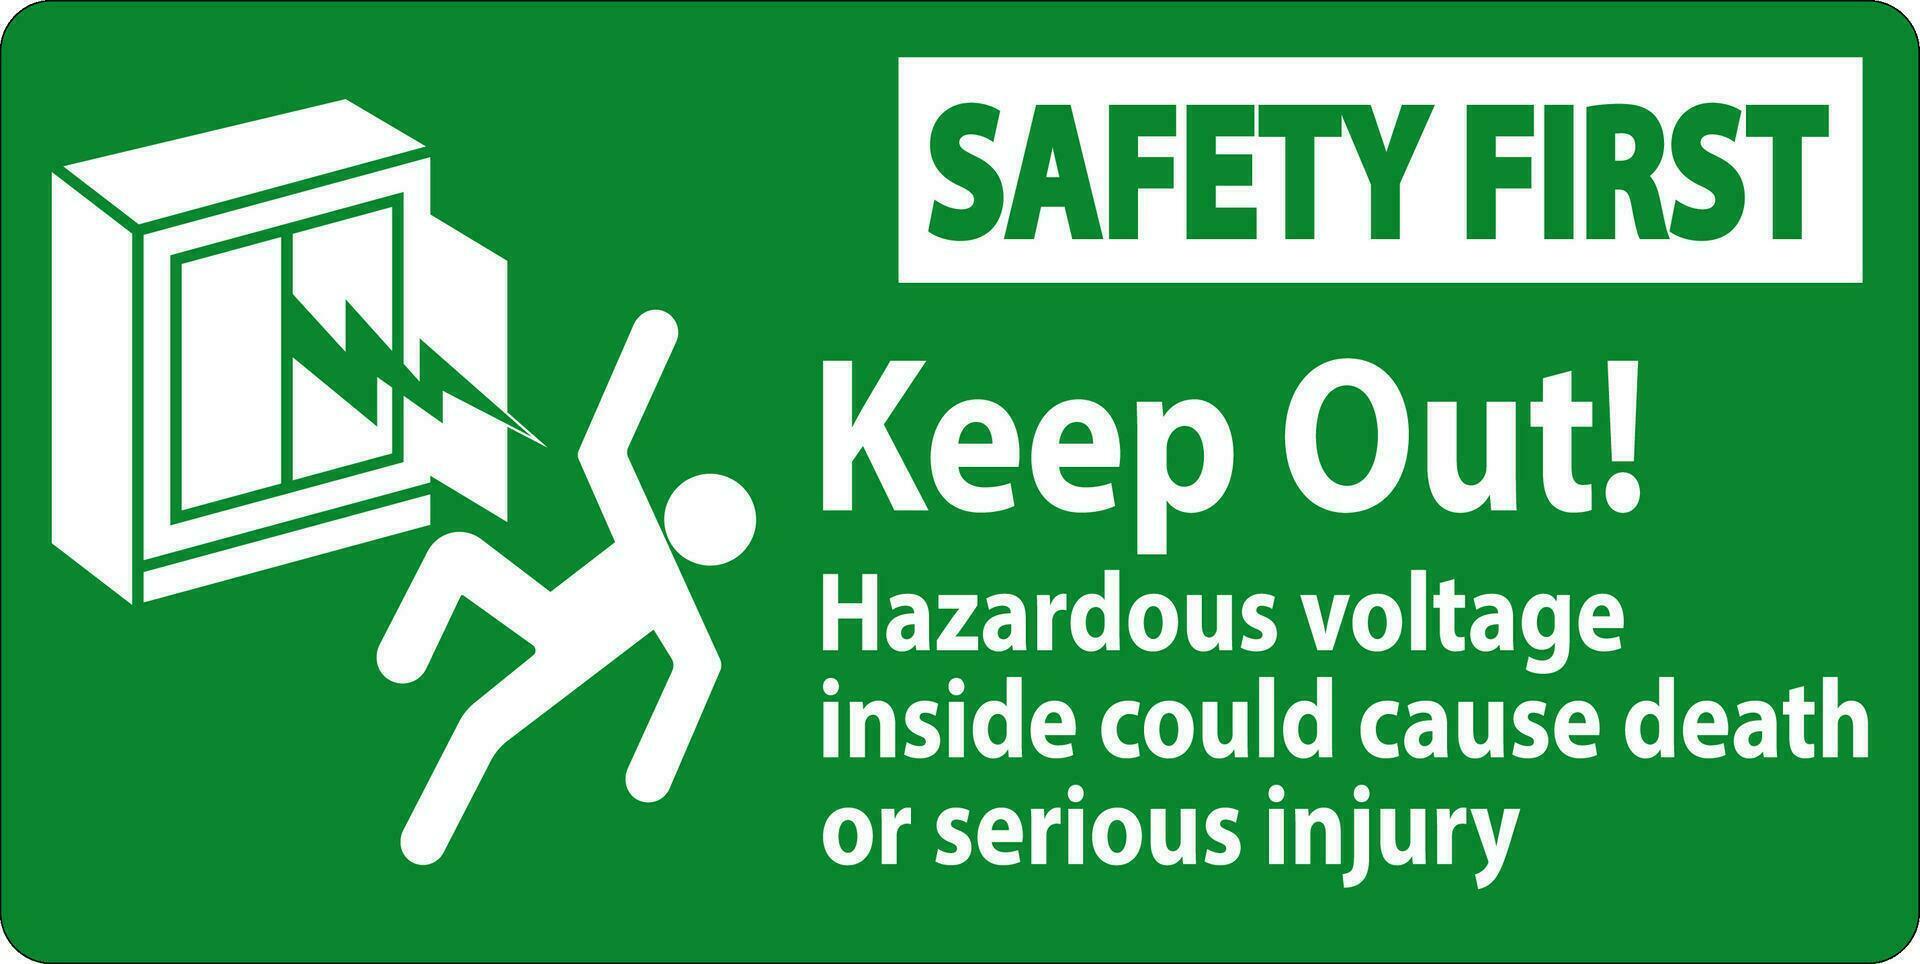 Safety First Sign Keep Out Hazardous Voltage Inside, Could Cause Death Or Serious Injury vector